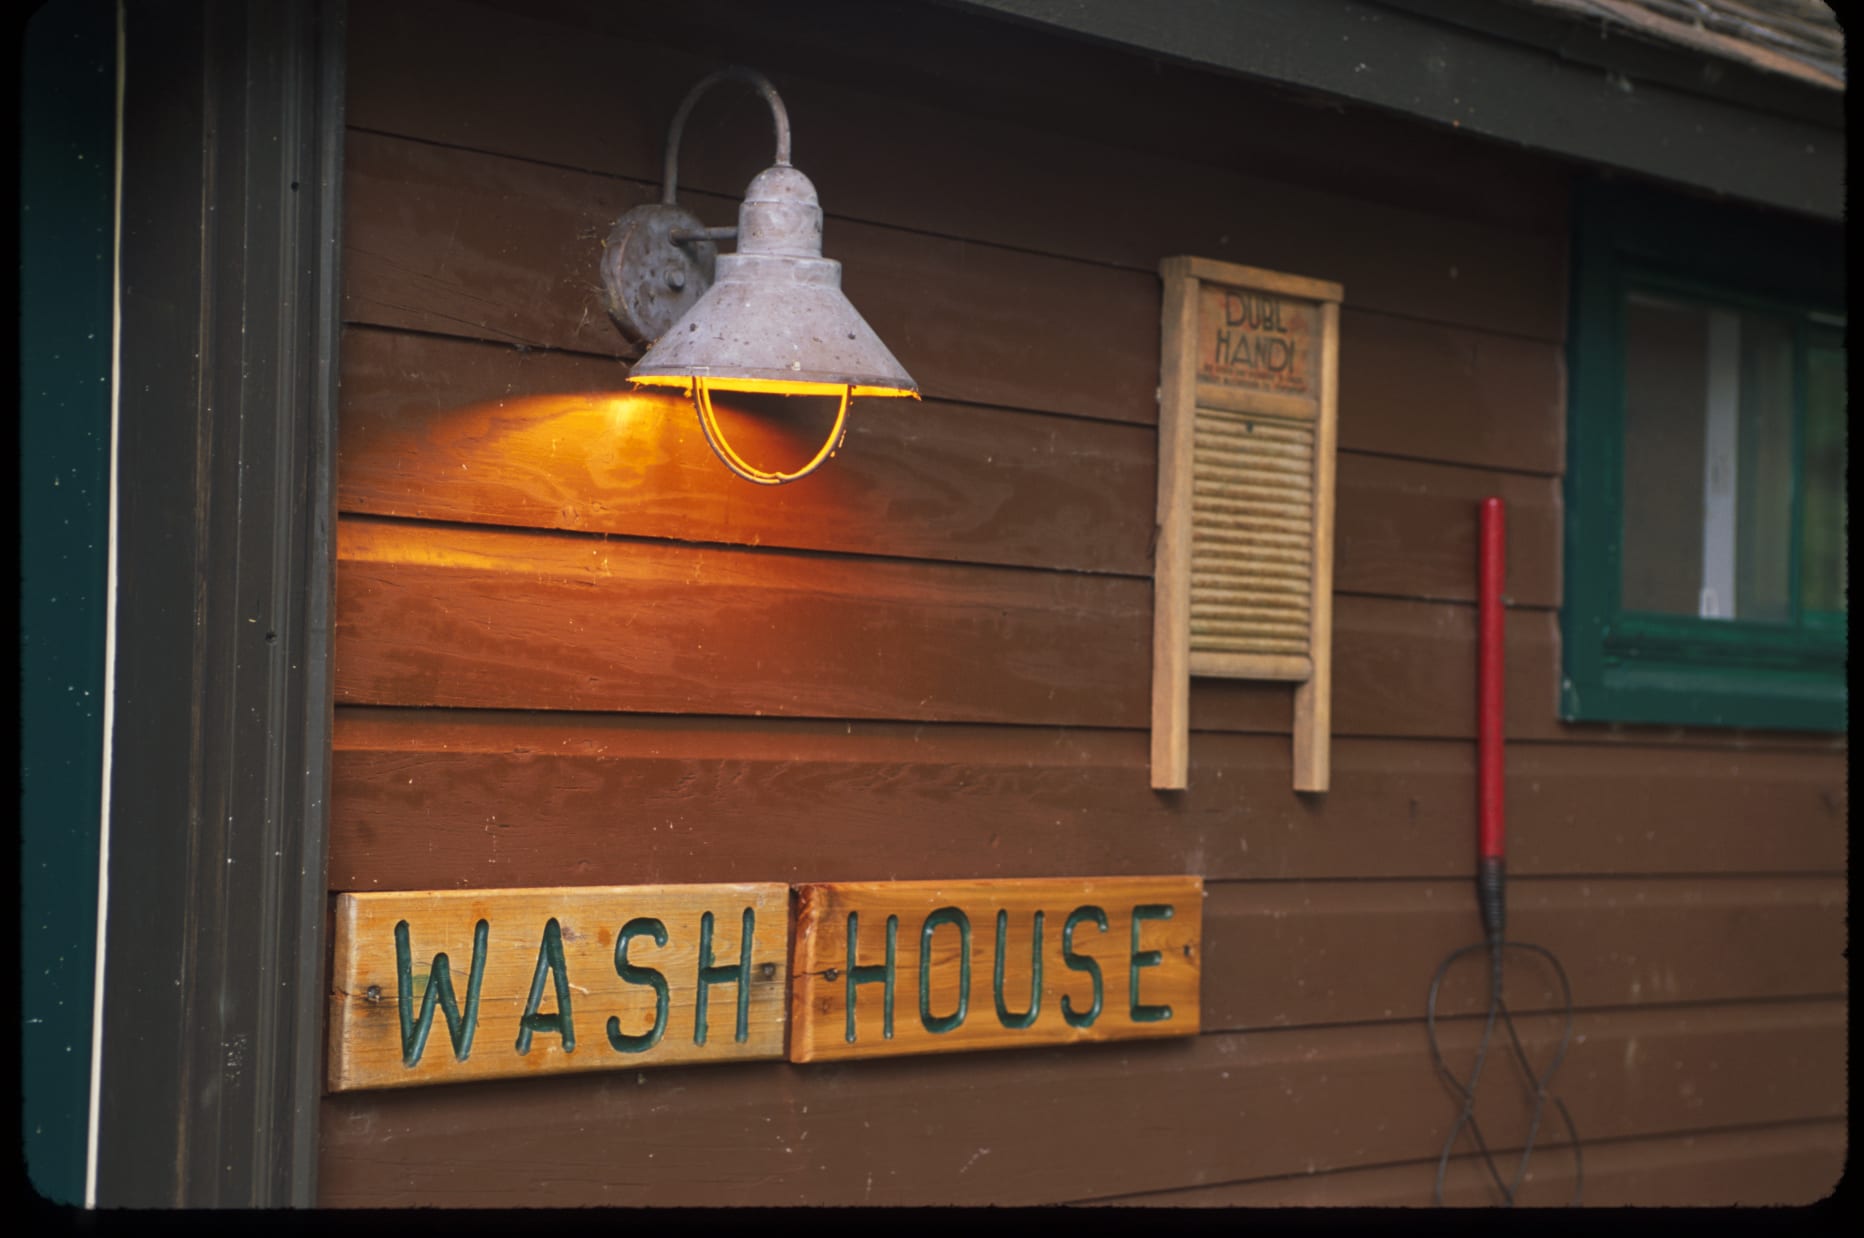 Washhouse exterior with sign.